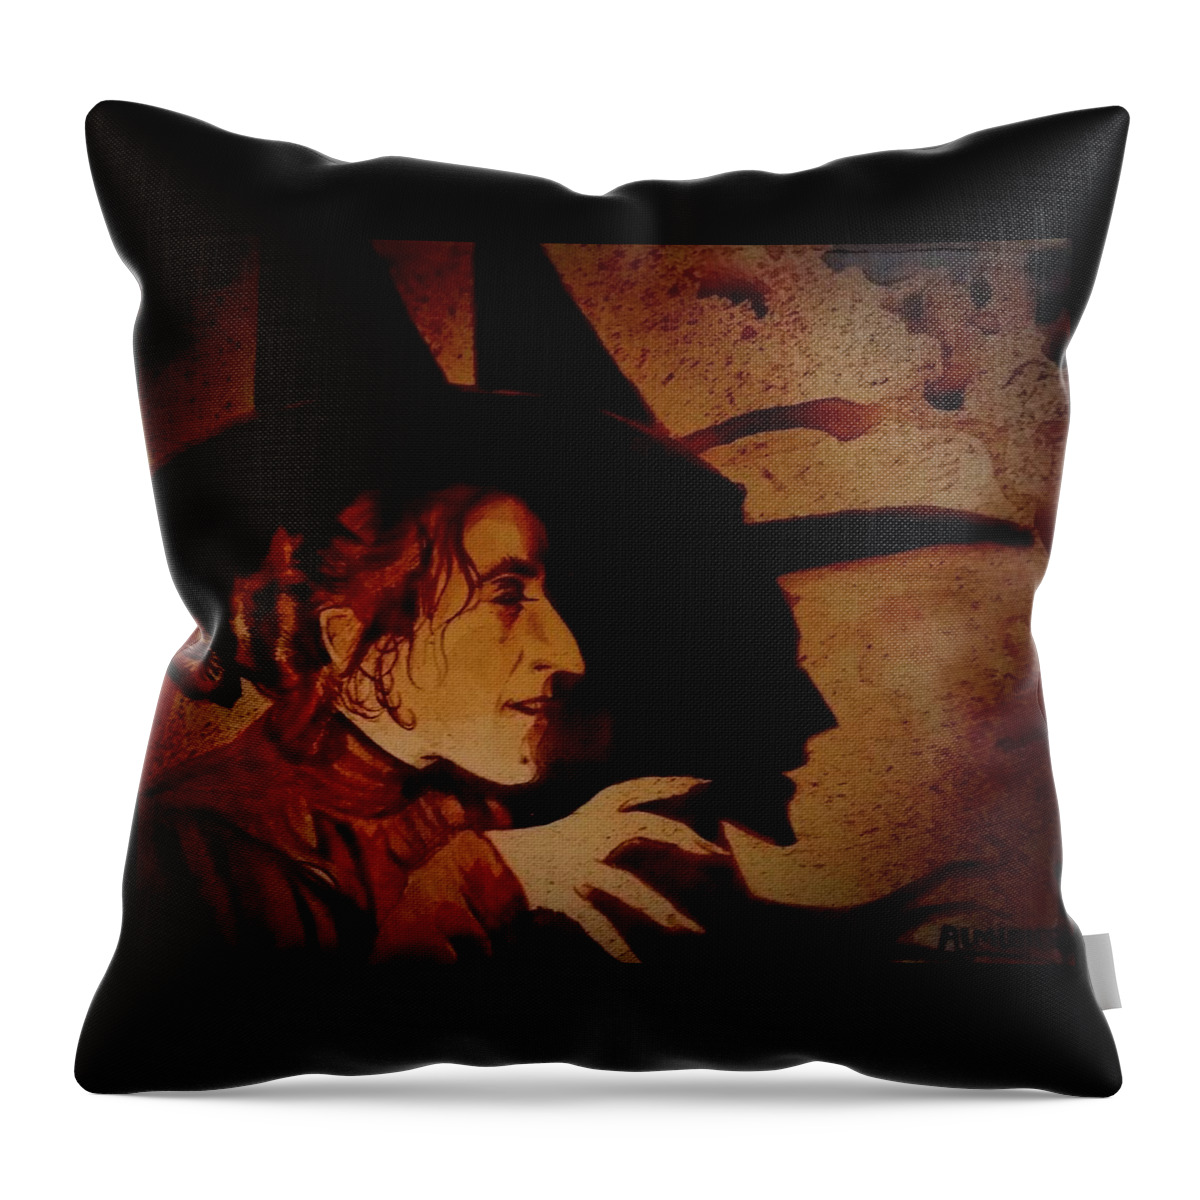 Ryan Almighty Throw Pillow featuring the painting WIZARD OF OZ WICKED WITCH - fresh blood by Ryan Almighty